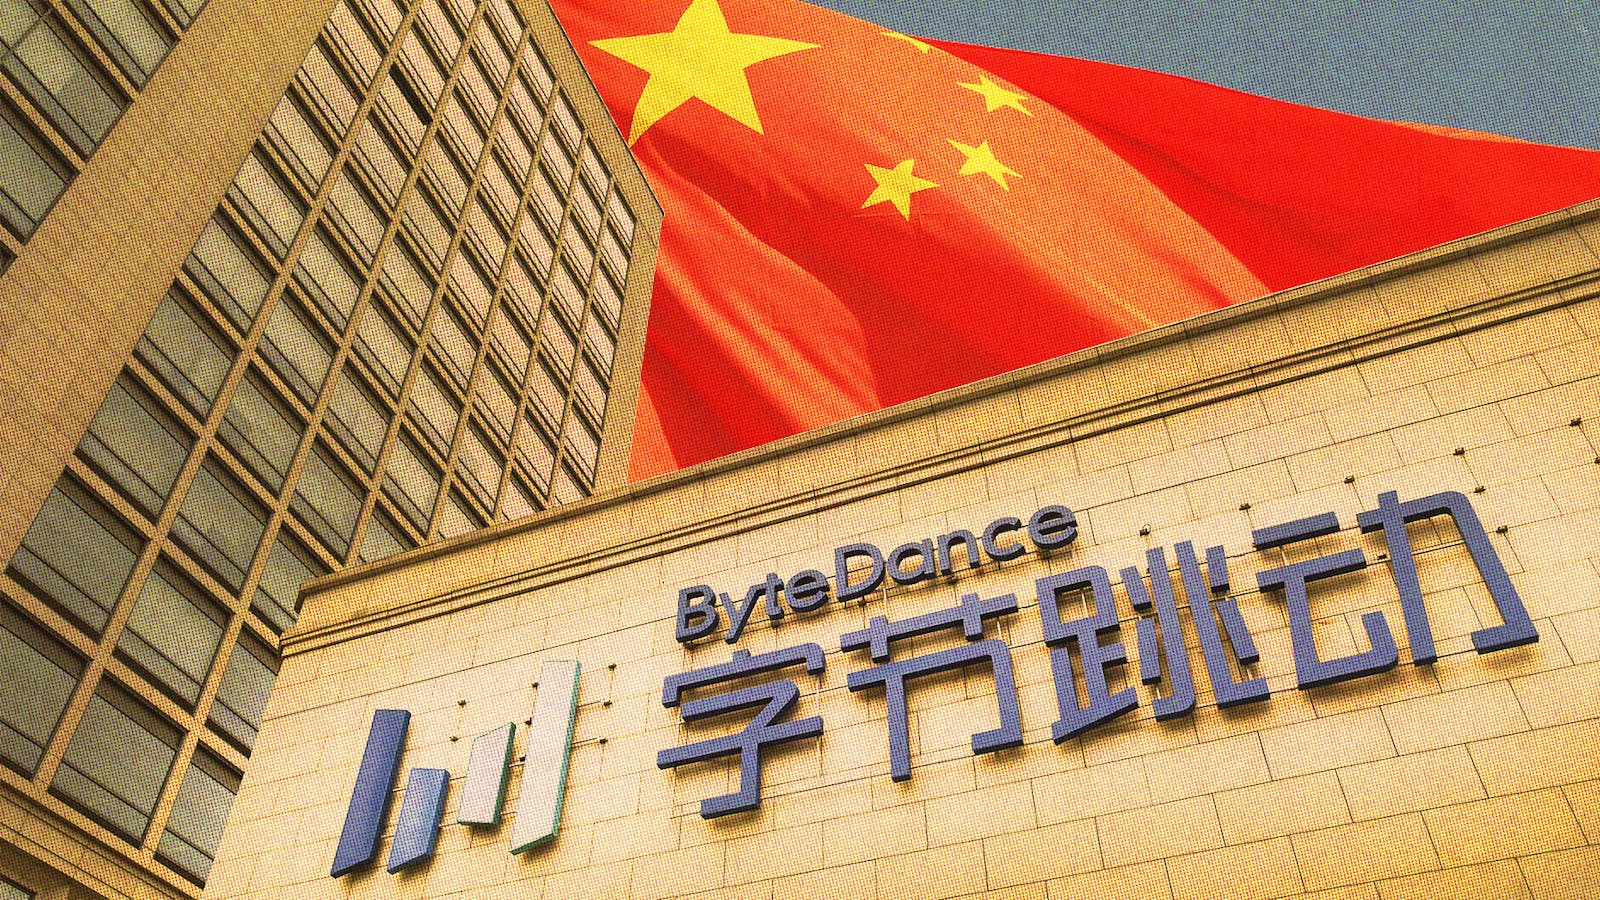 ByteDance headquarters in Beijing. Photo by AP; illustration by Mike Sullivan